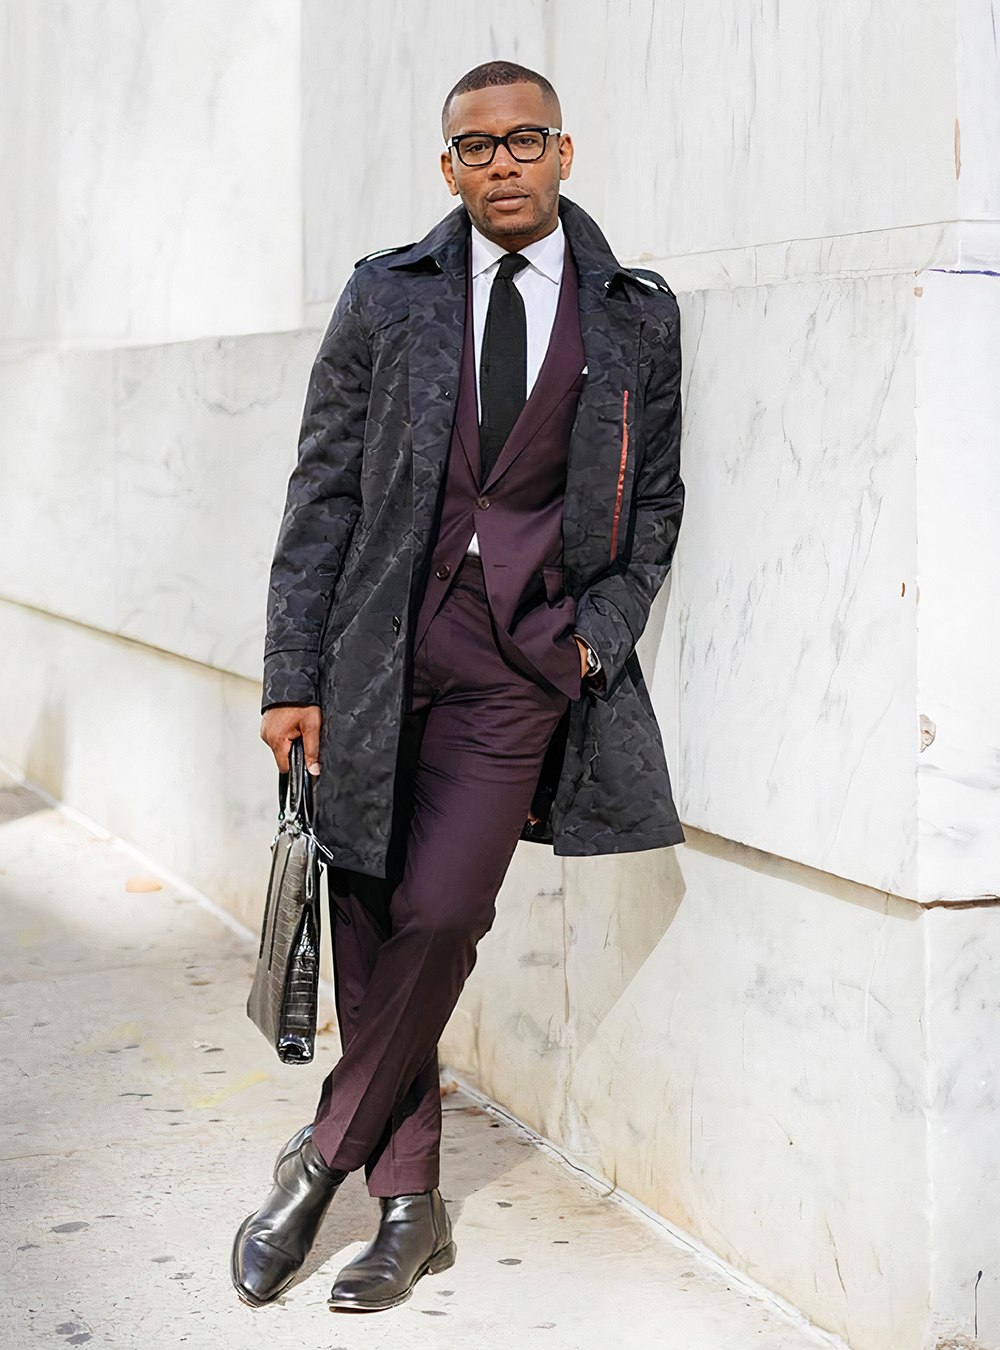 burgundy suit, white shirt, and black tie and Chelsea boots